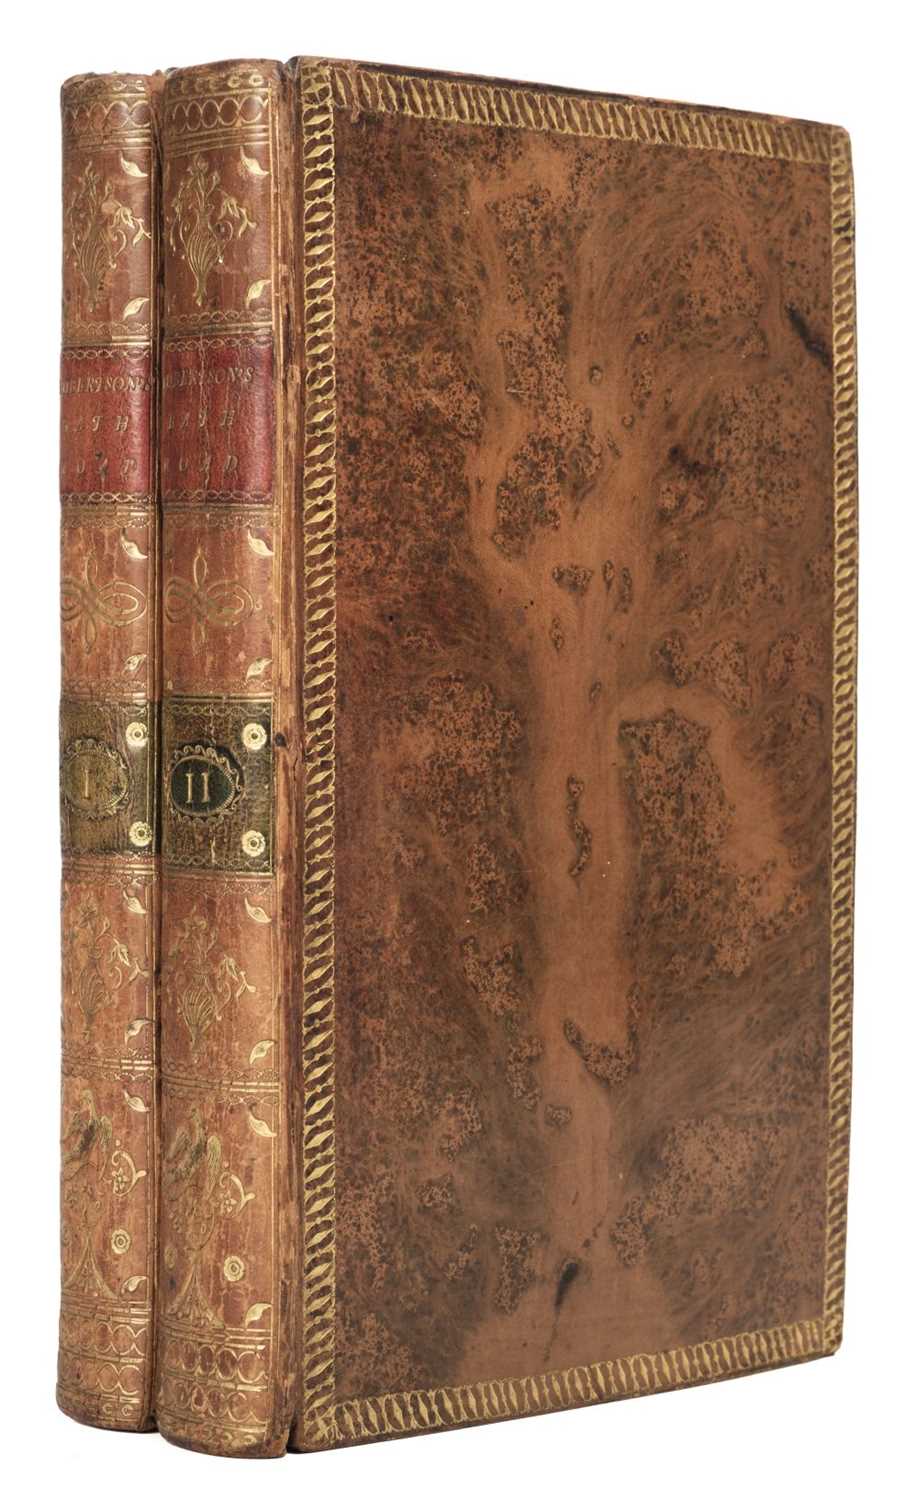 Lot 69 - Robertson (A.). A Topographical Survey of the Great Road from London to ... Bristol, 2 vols., 1792